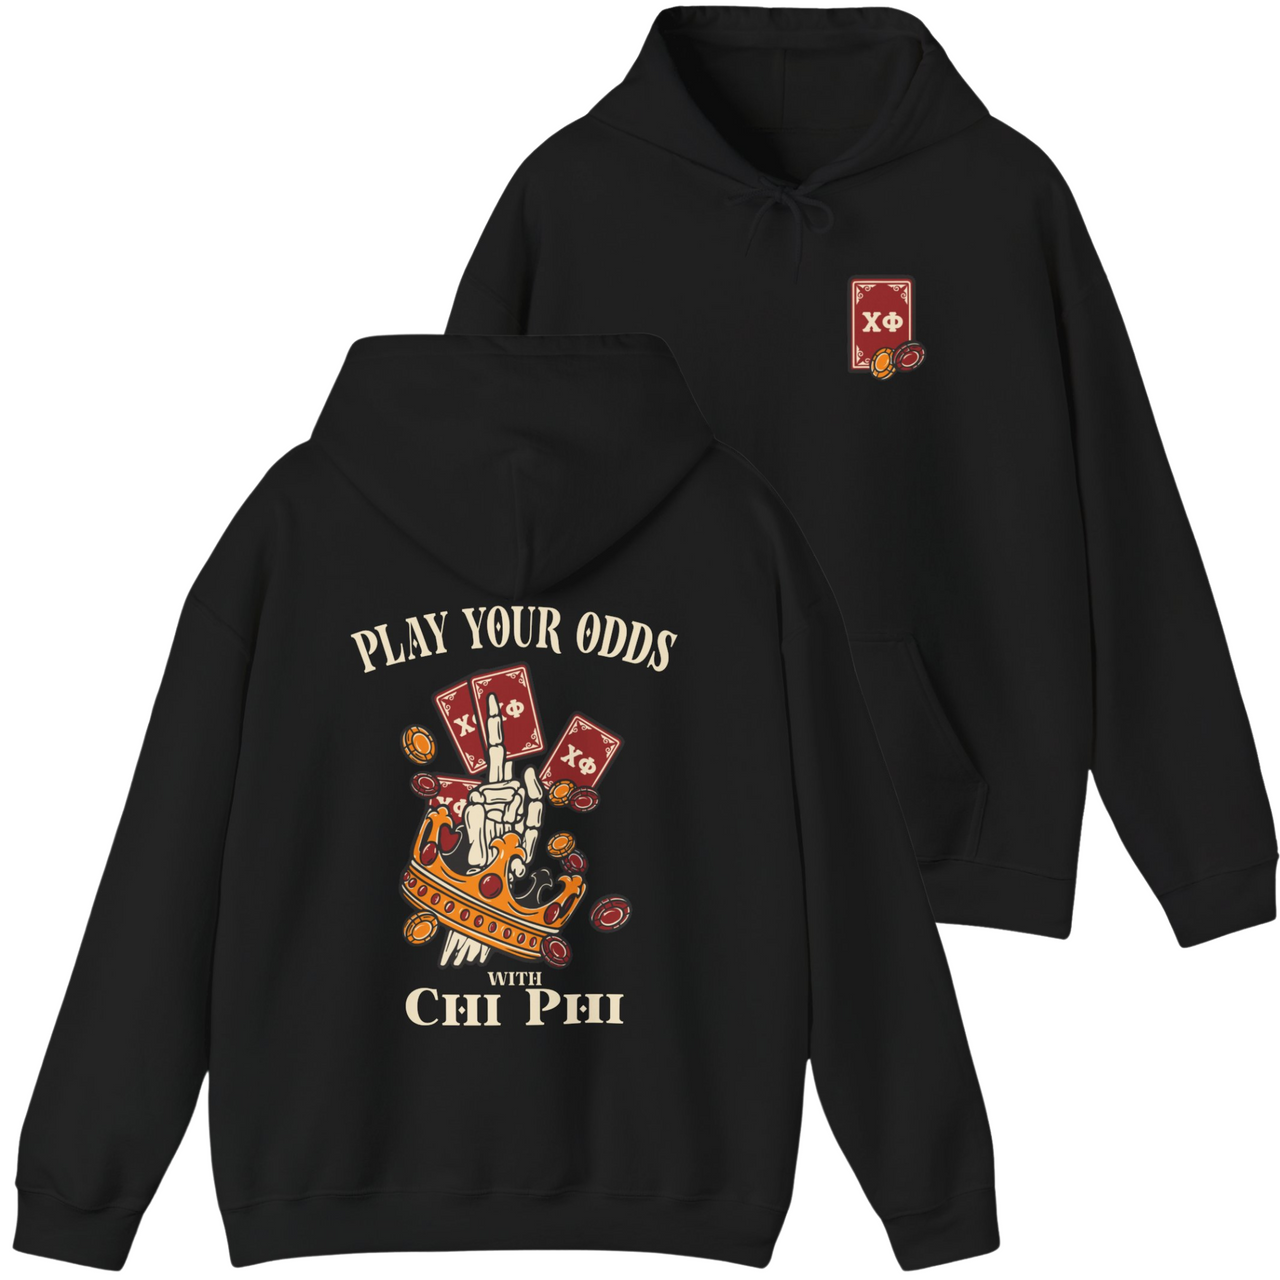 Chi Phi Graphic Hoodie | Play Your Odds